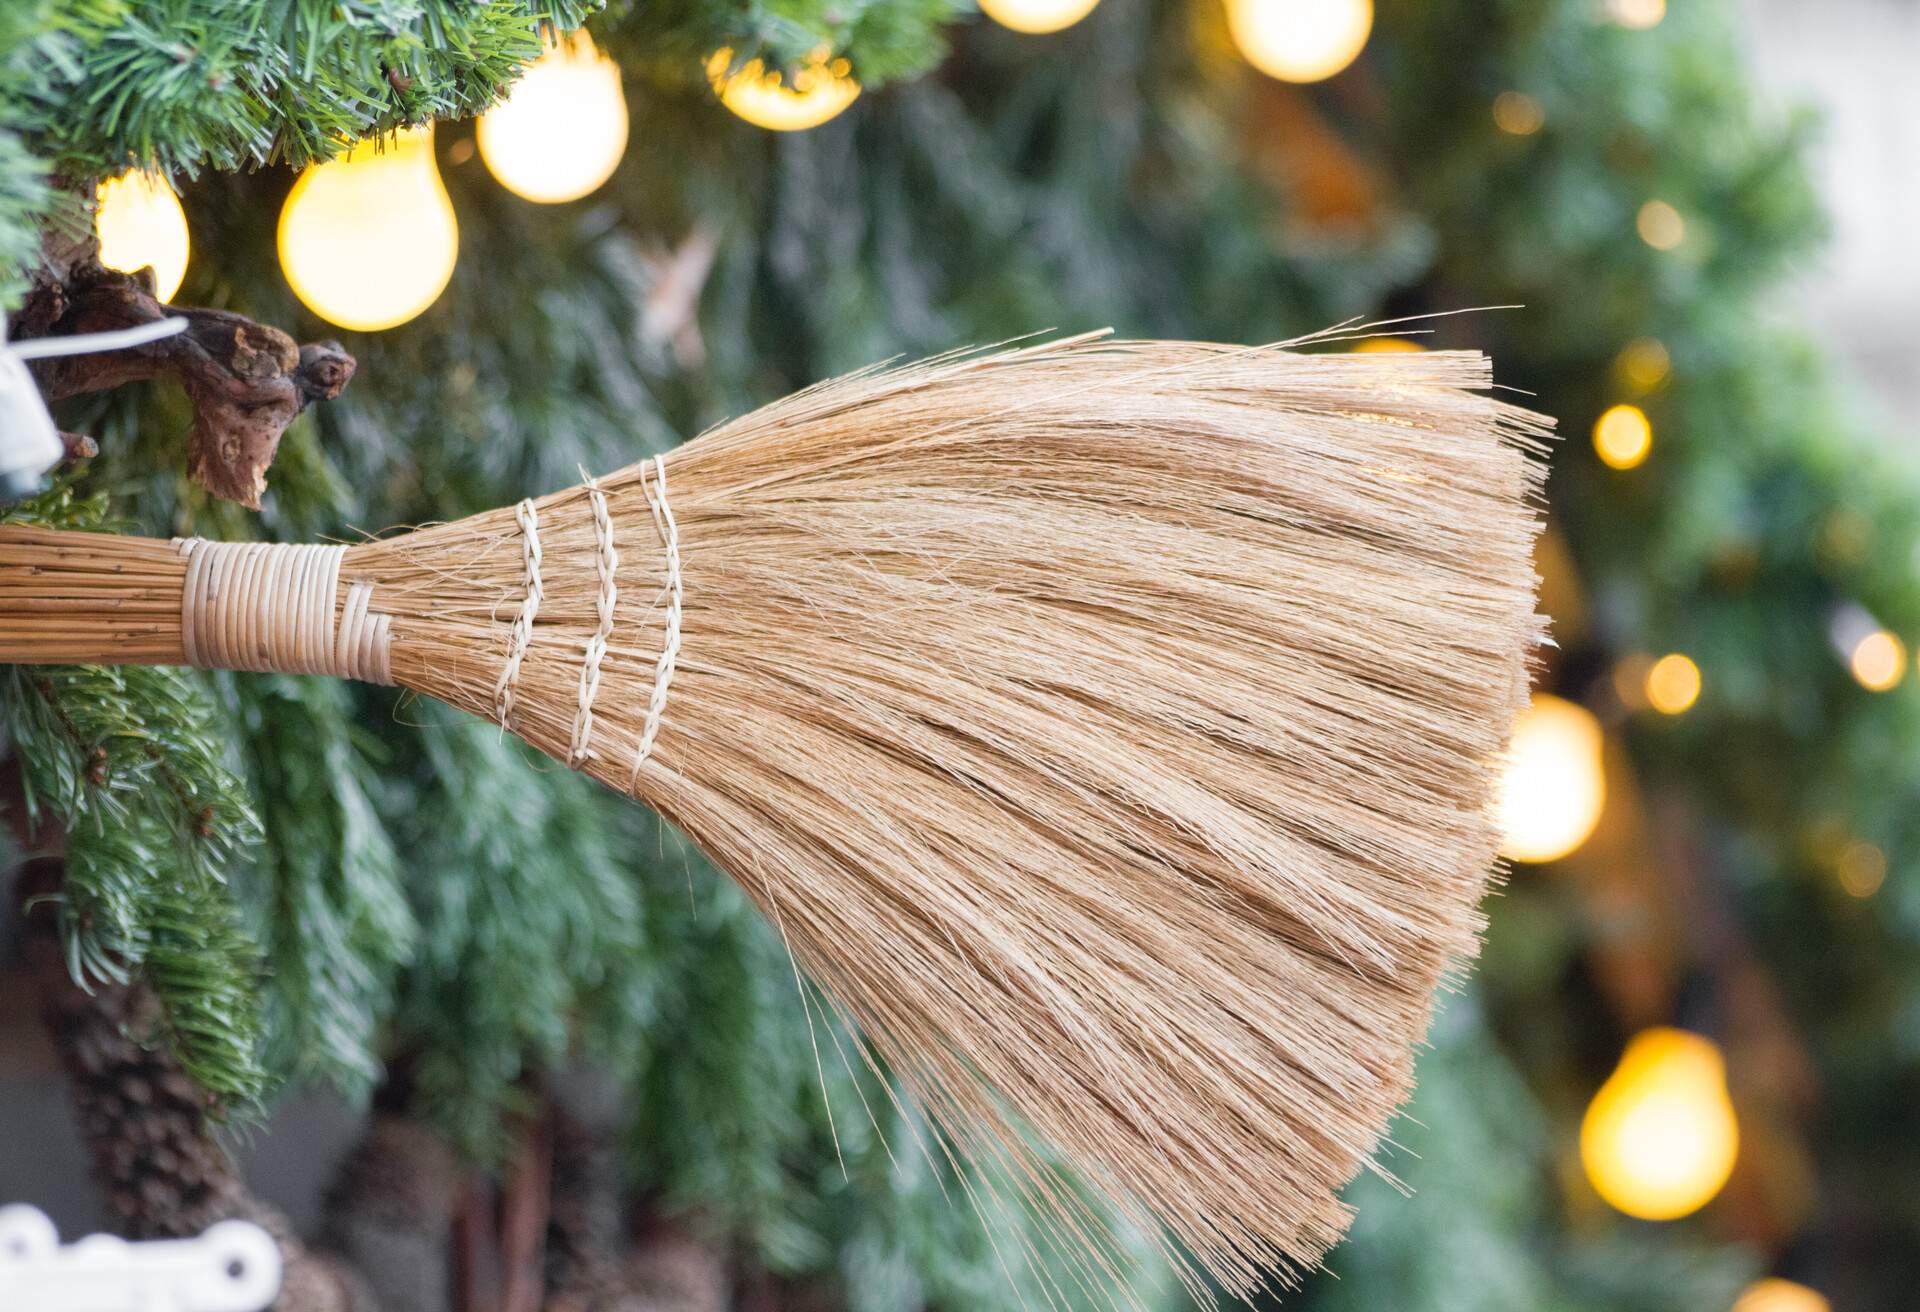 A wooden broom in front of a christmas tree with lights